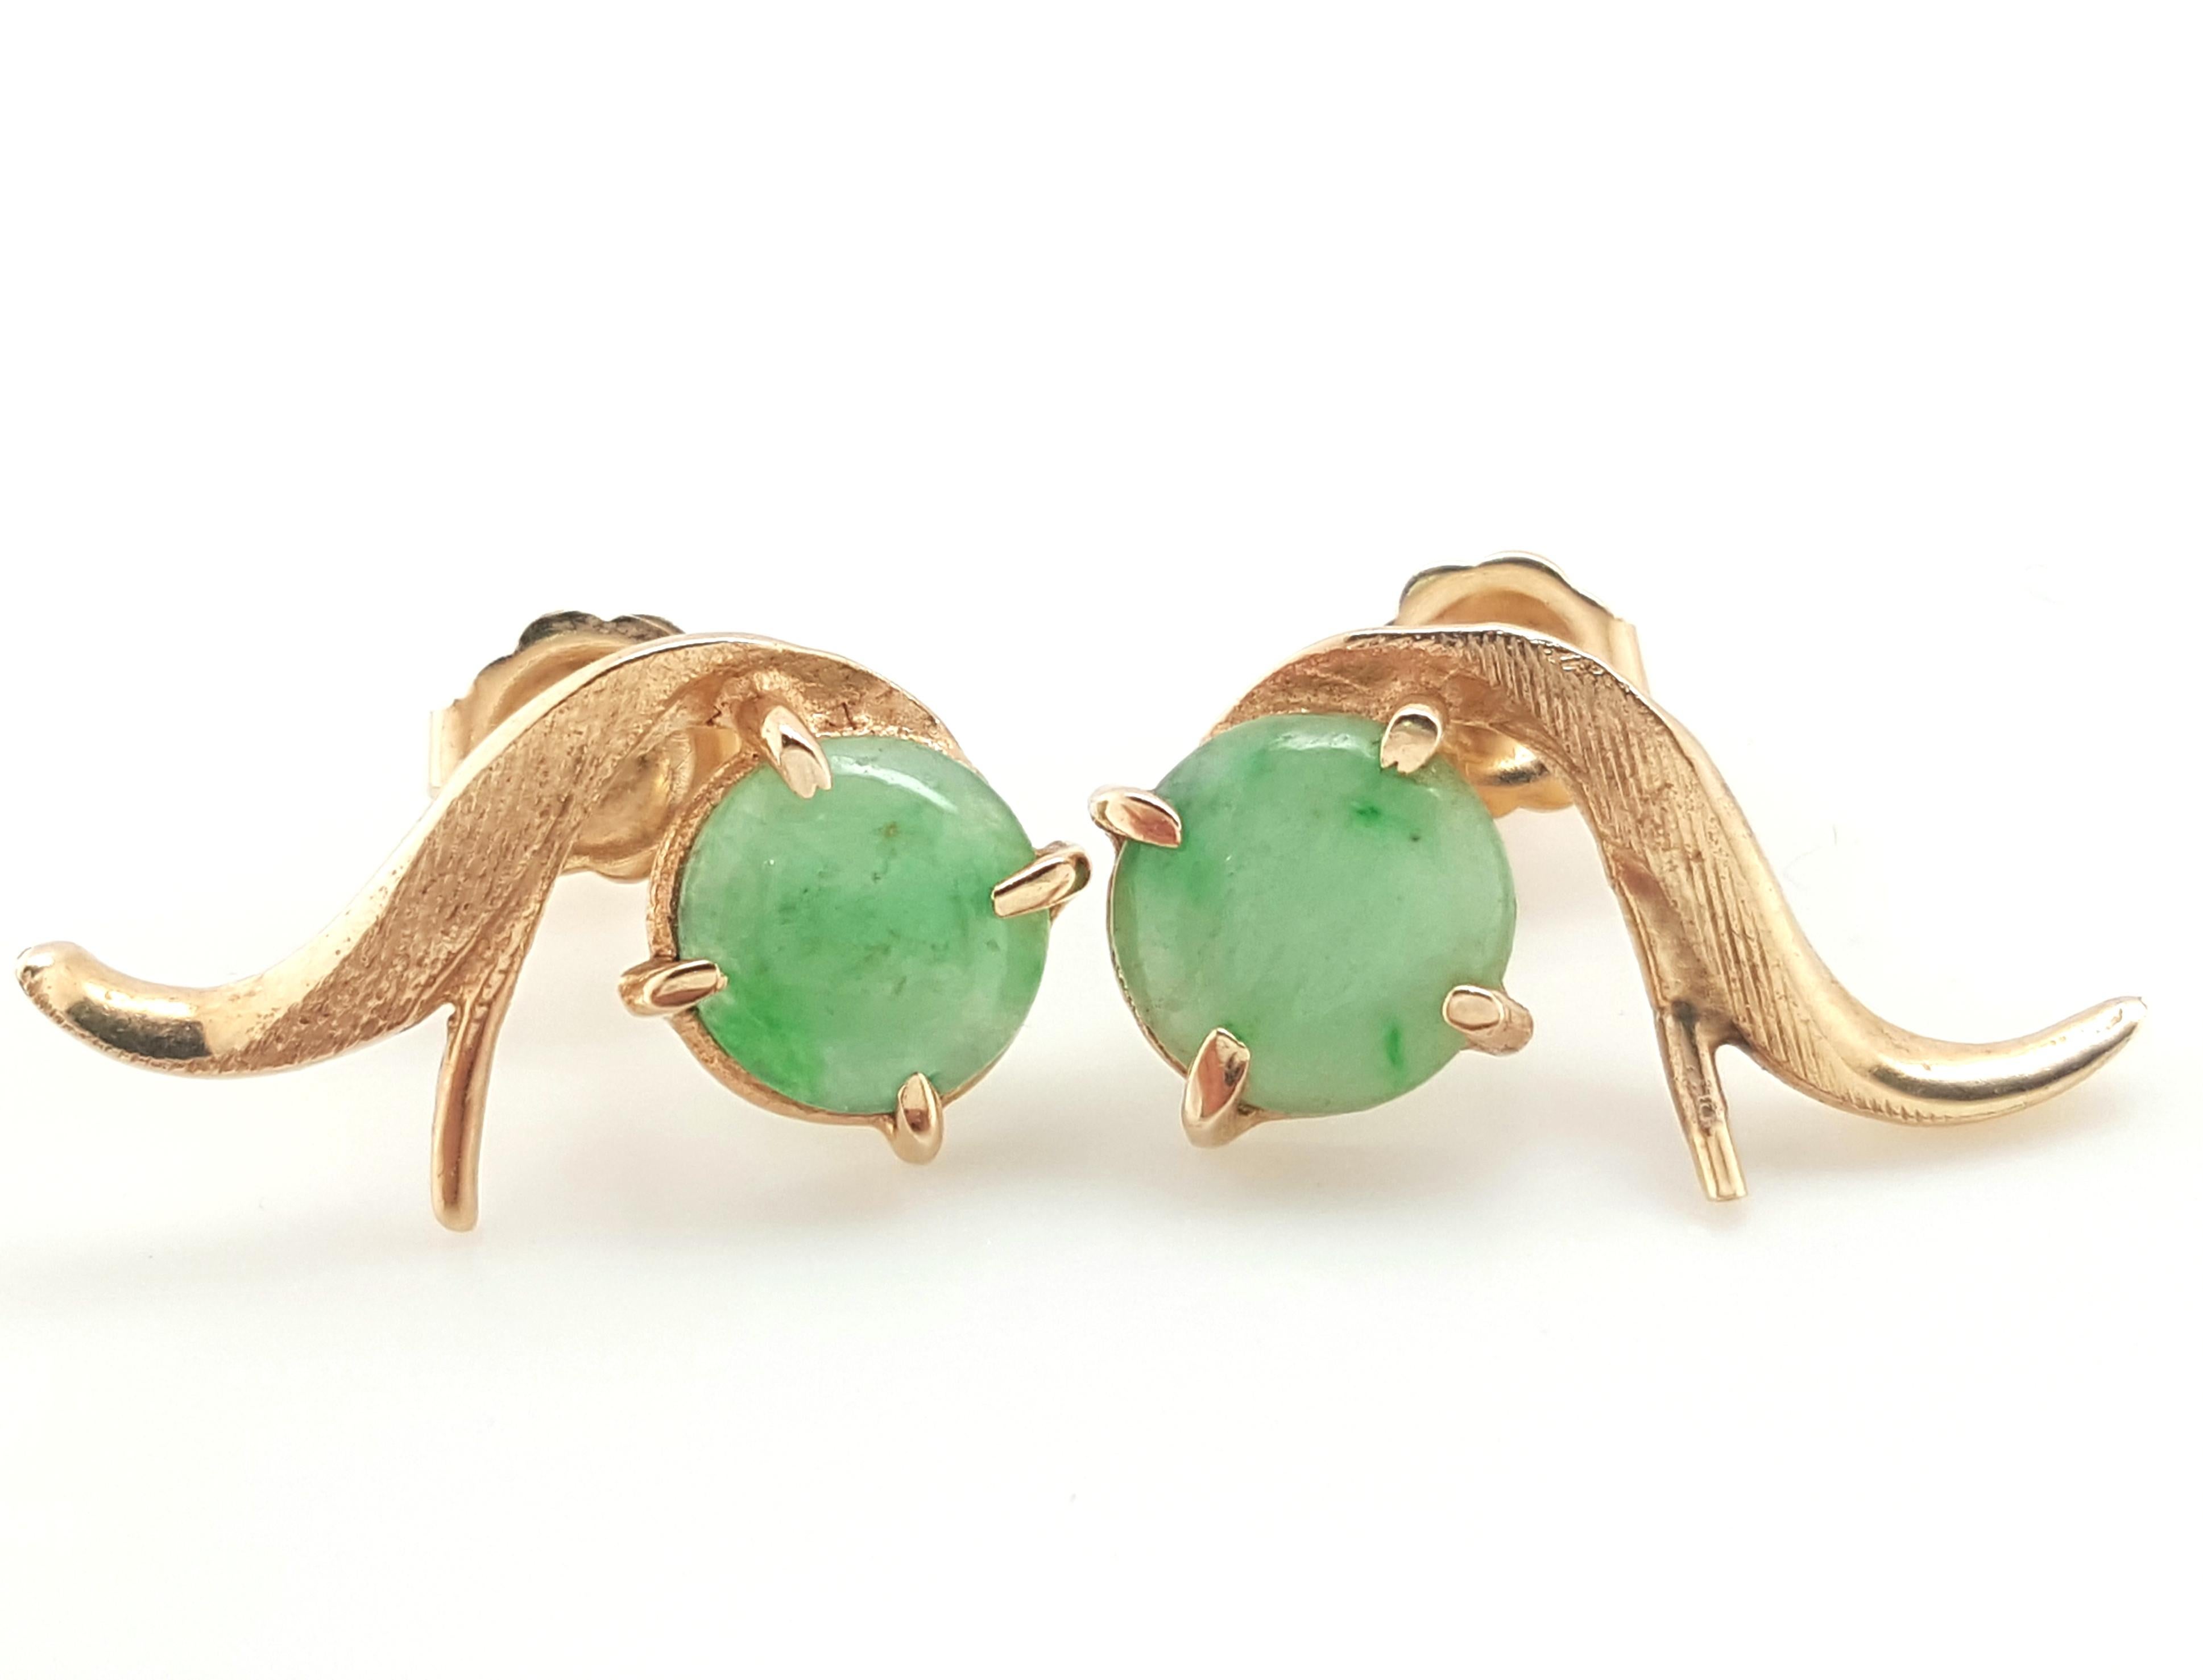 14 Karat Yellow Gold Cabochon Jadeite Jade Stud Earrings.  The earrings feature a pair of cabochon jadeite jade.  The jade are each set into a 14 karat yellow gold four prong setting, complemented by a sweeping ribbon of textured gold, completed by